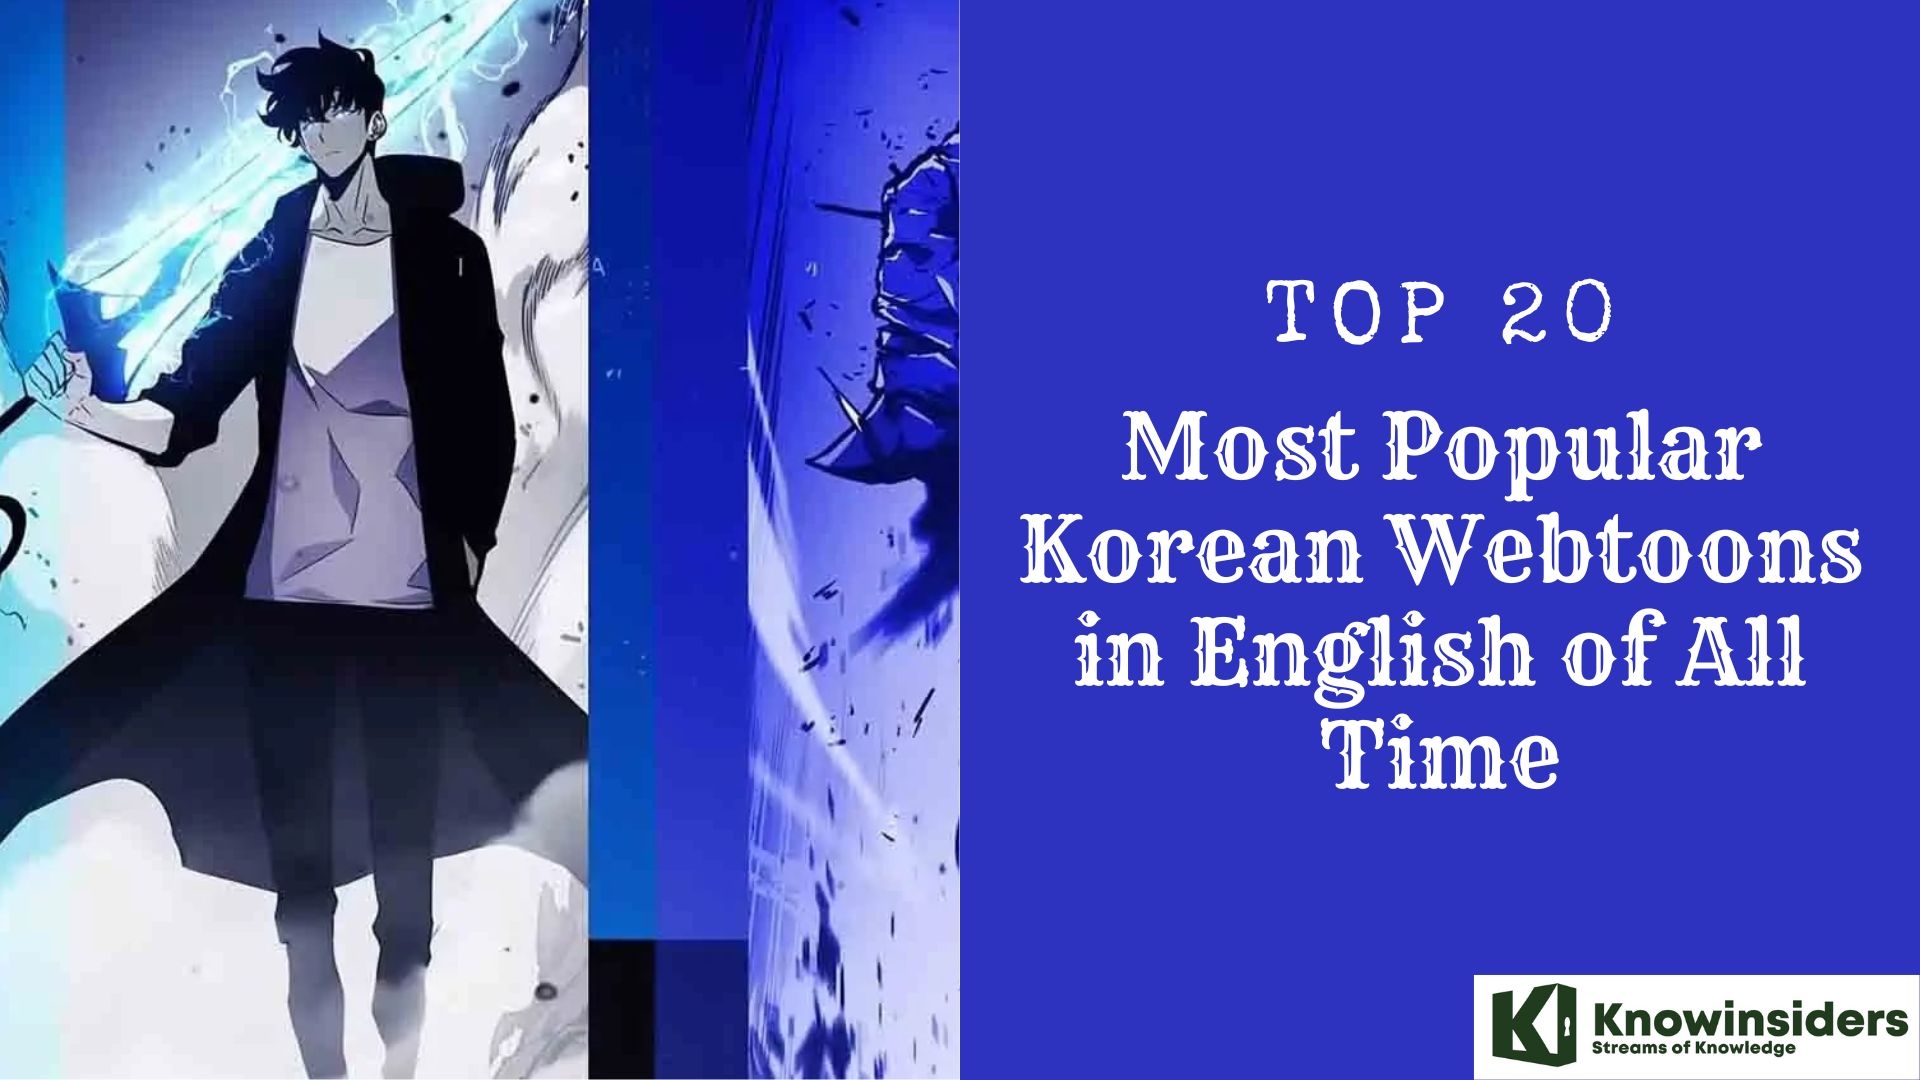 Top 20 Most Popular Korean Webtoons in English of All Time Knowinsiders.com